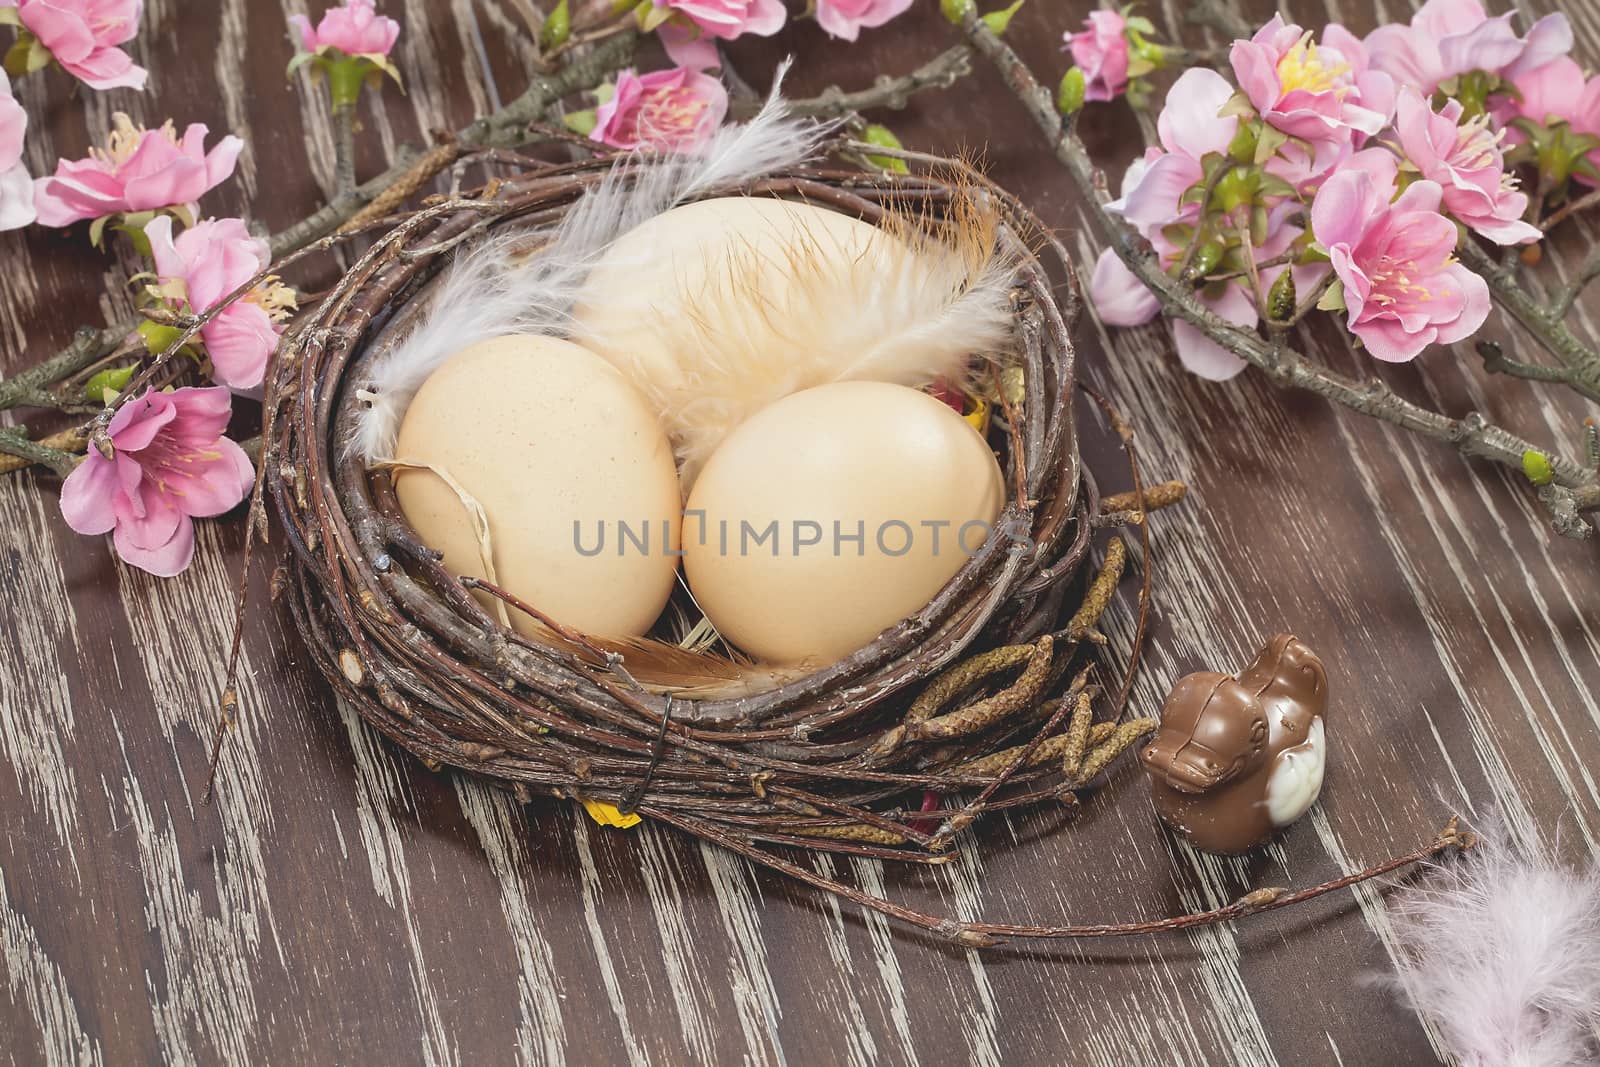 Eggs in a spring blossom nest by Slast20